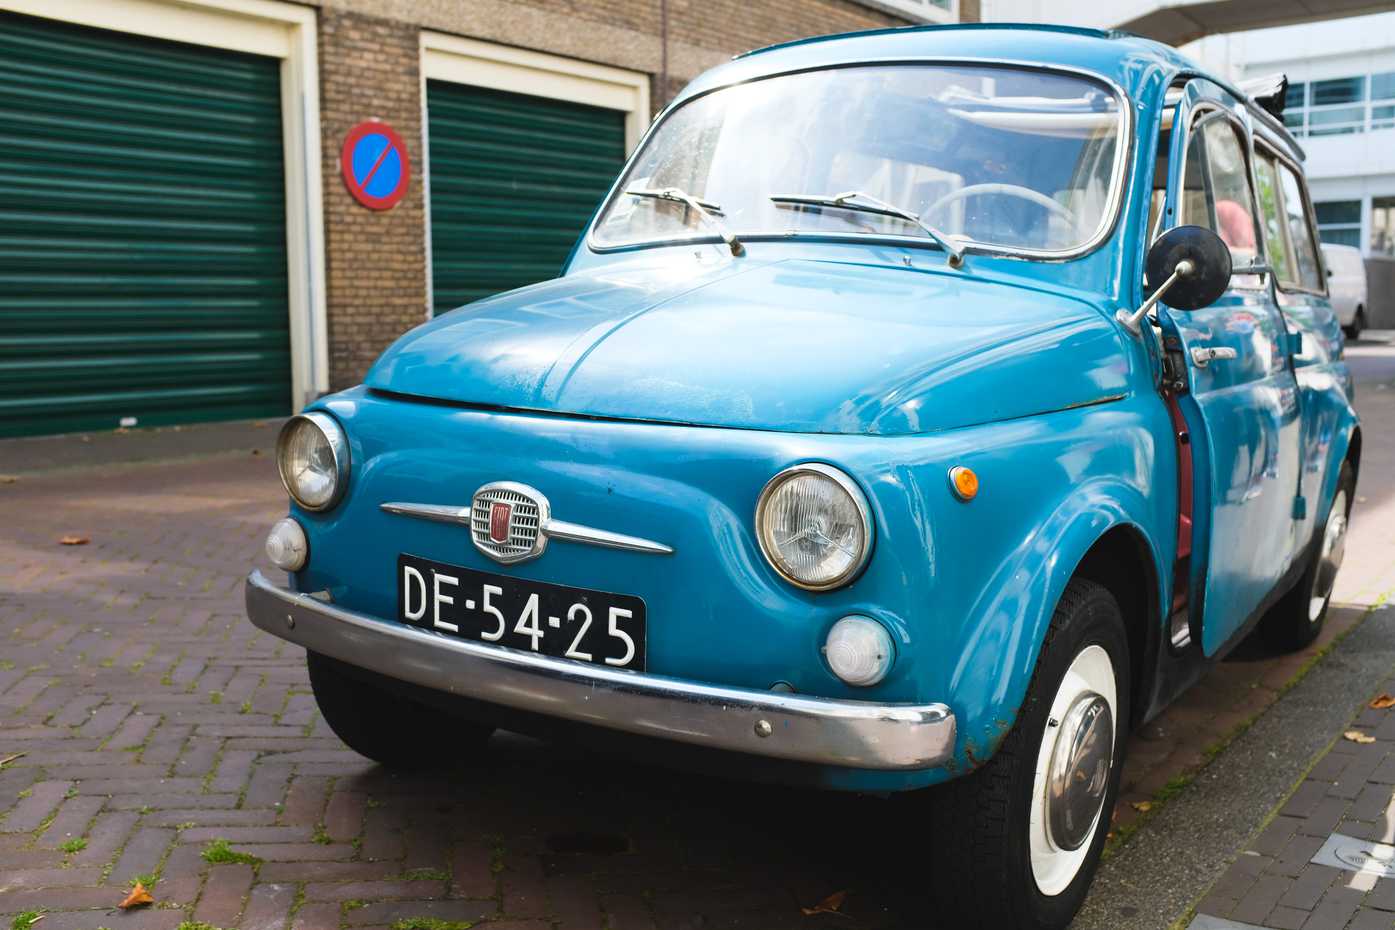 And old blue Fiat car